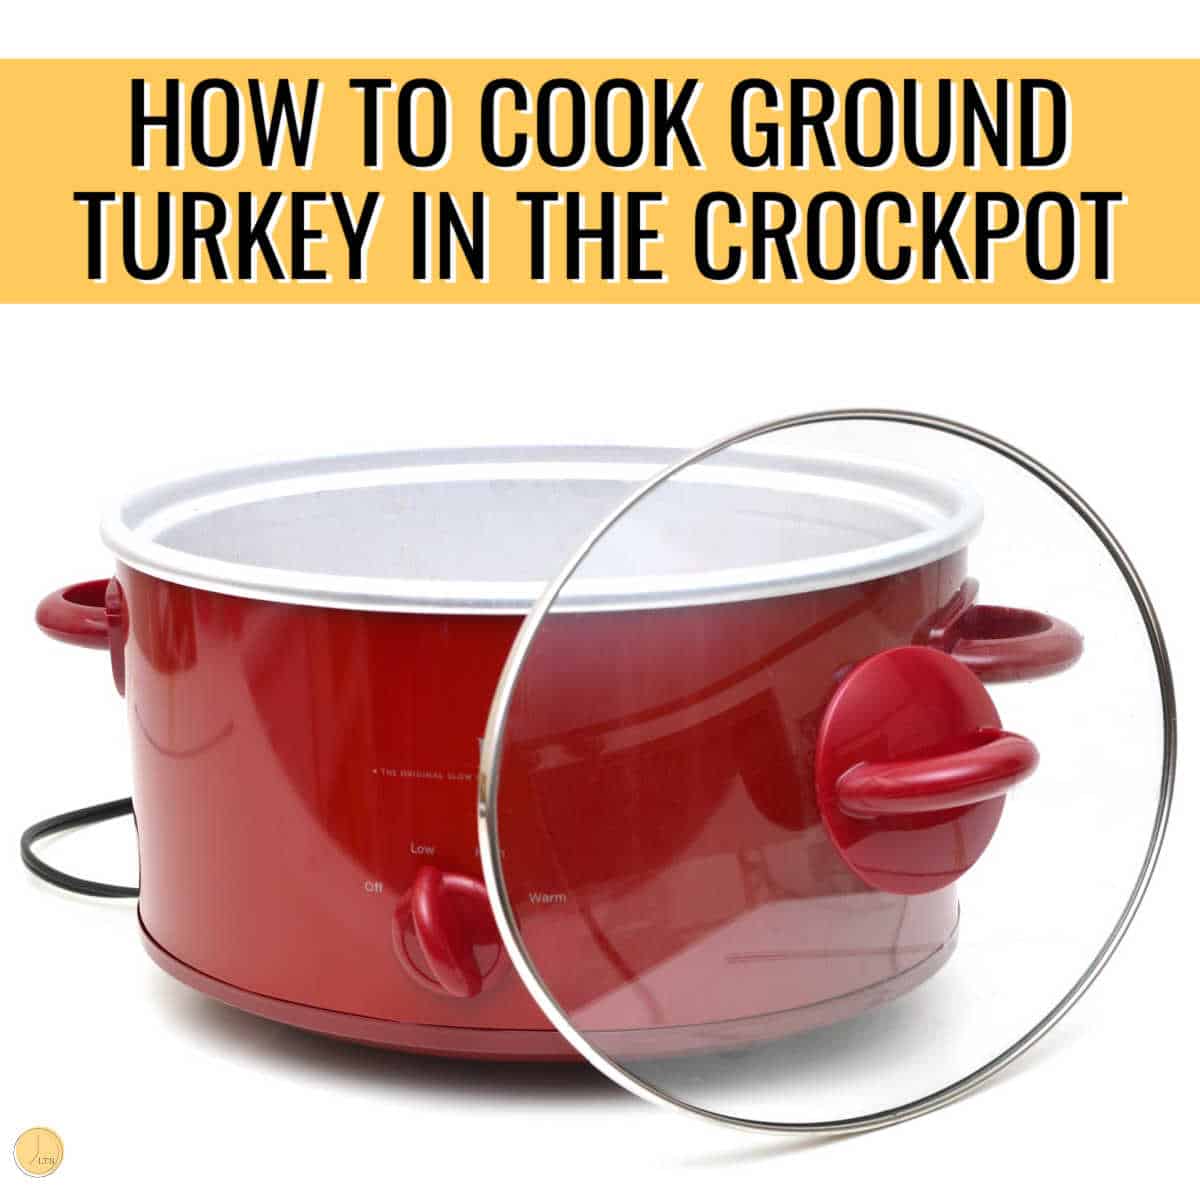 How to Cook Ground Turkey in the Crockpot